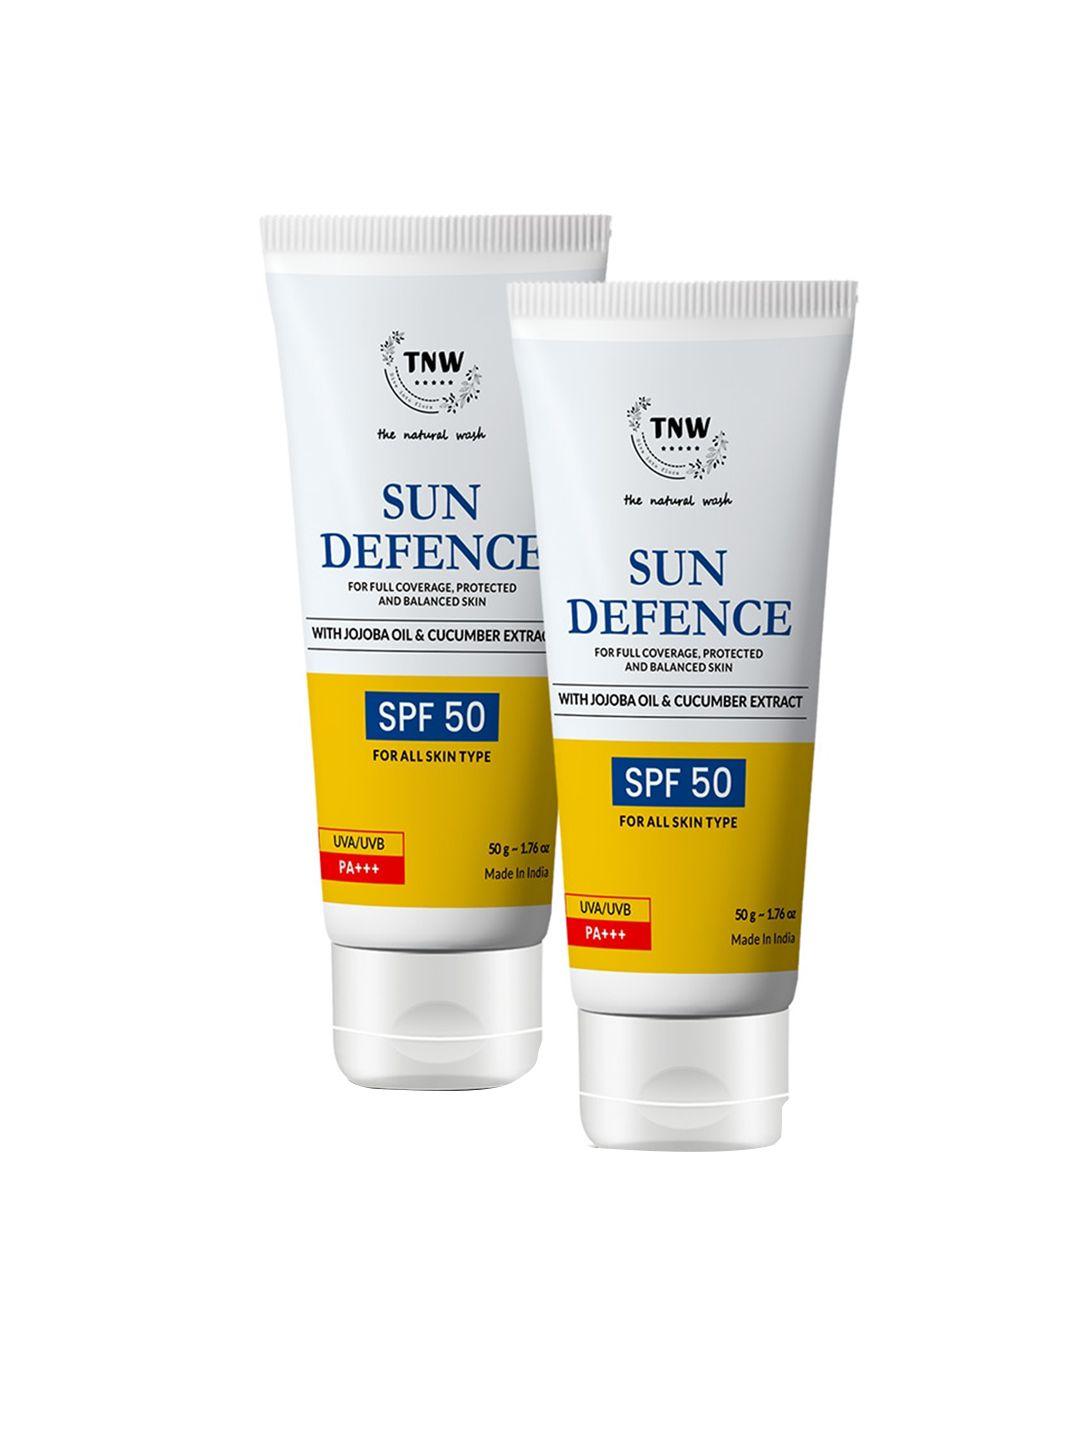 tnw the natural wash set of 2 sun defence spf50 sunscreen with jojoba - 50g each